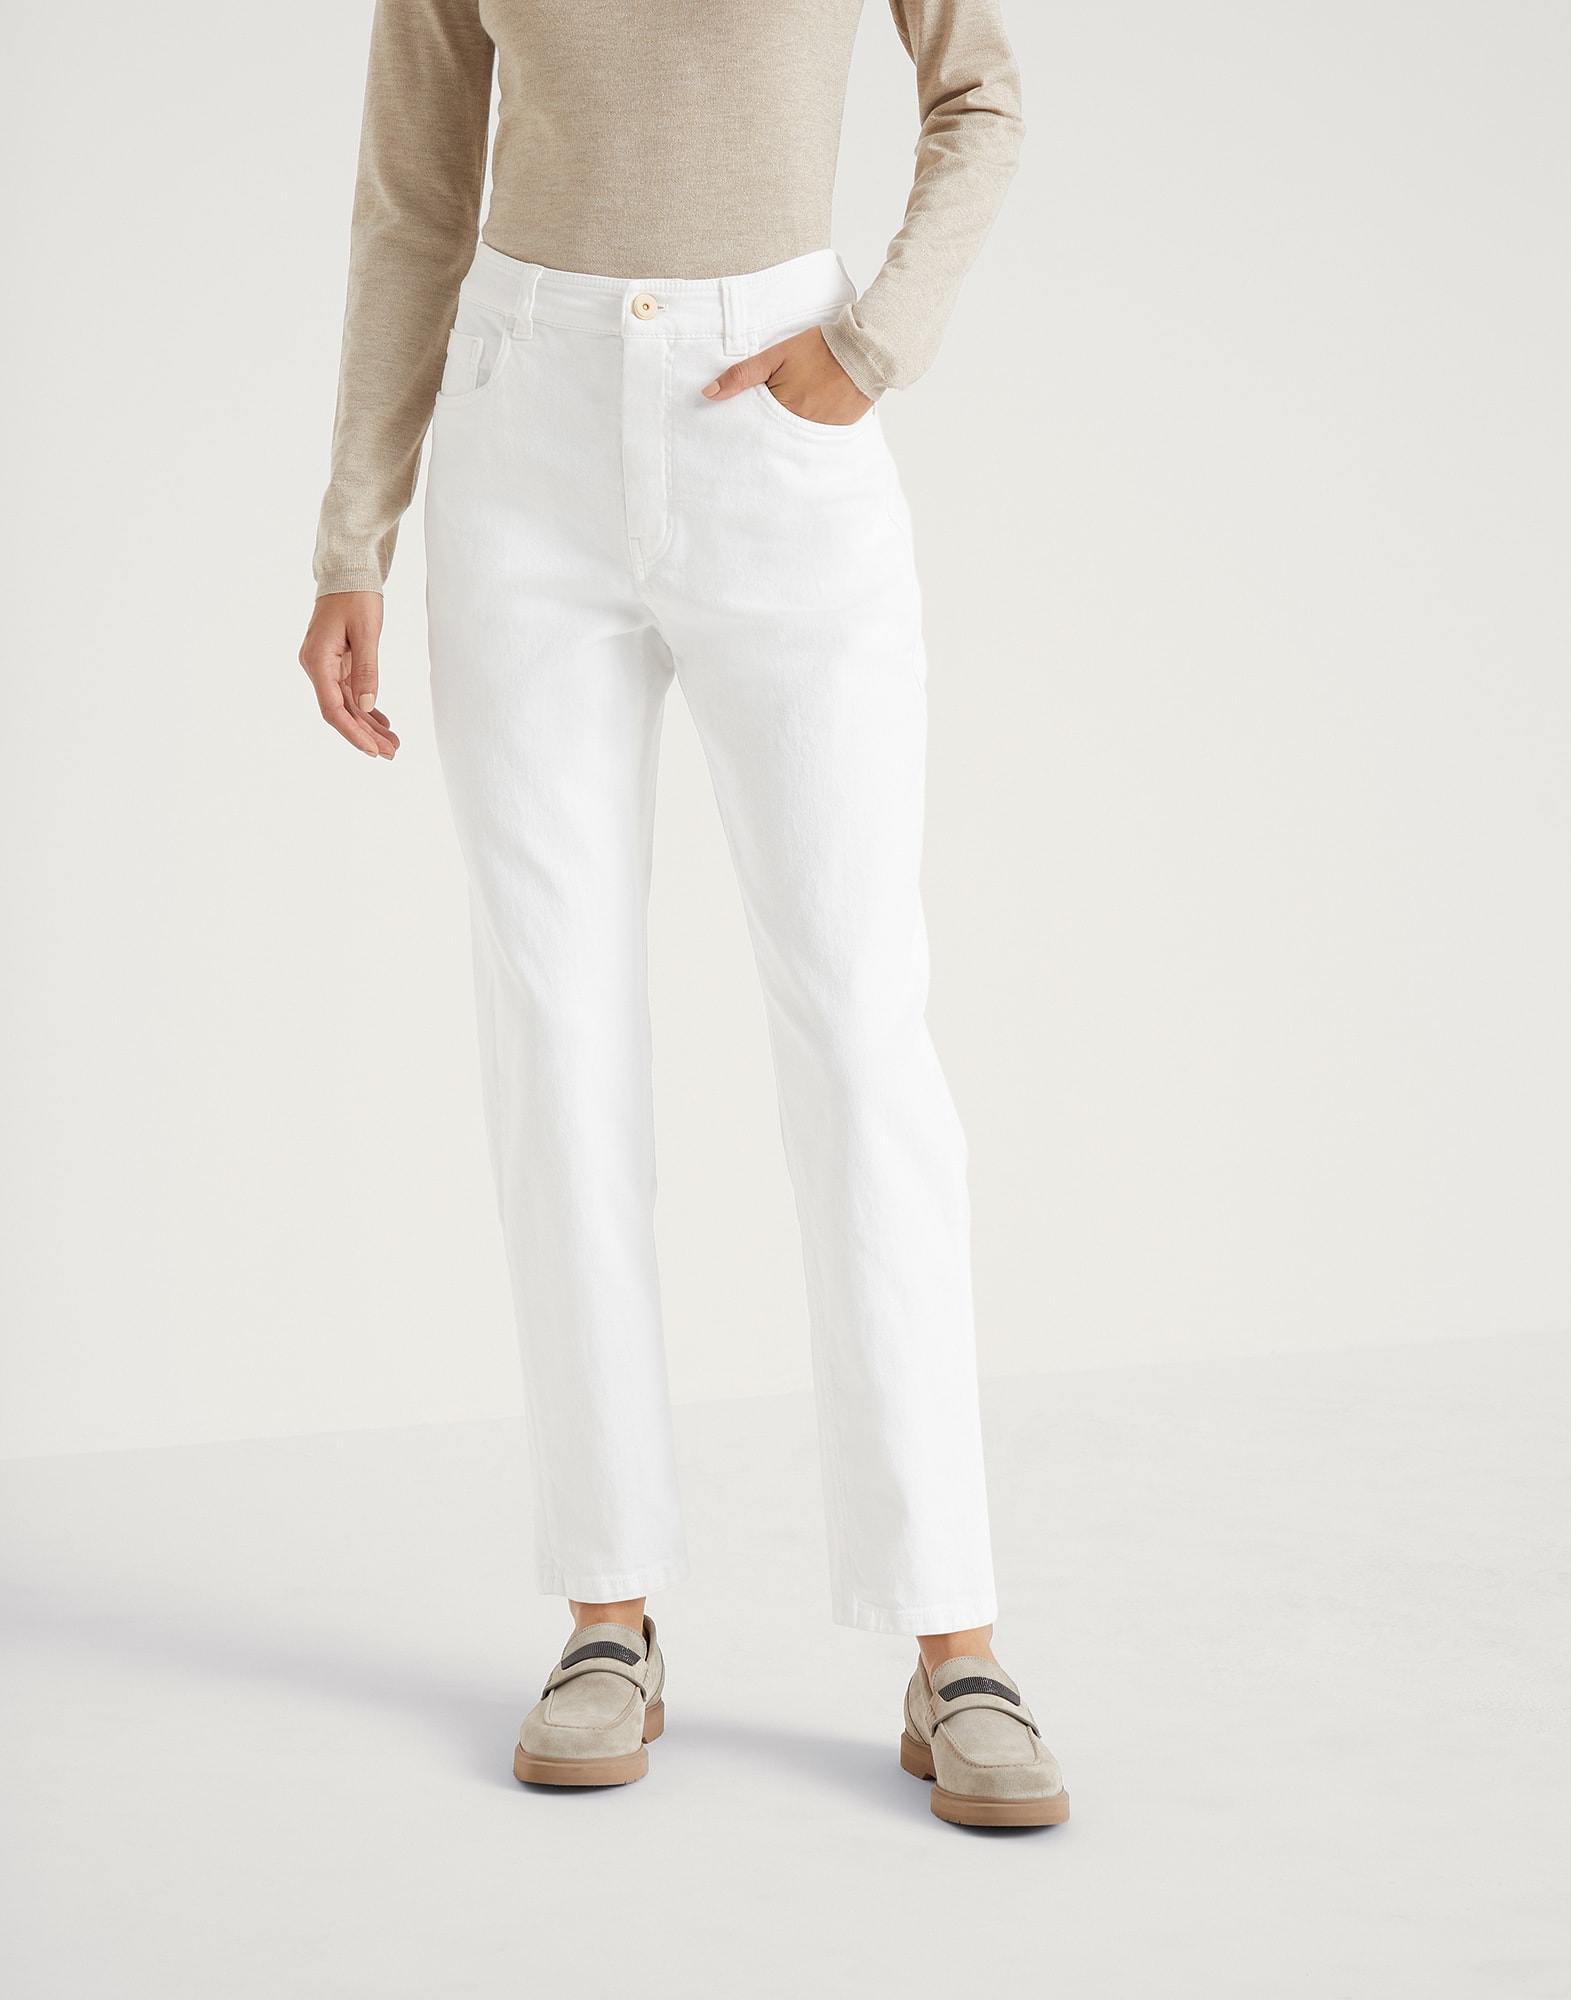 Shop AG Jeans Analeigh Denim Trousers | Saks Fifth Avenue